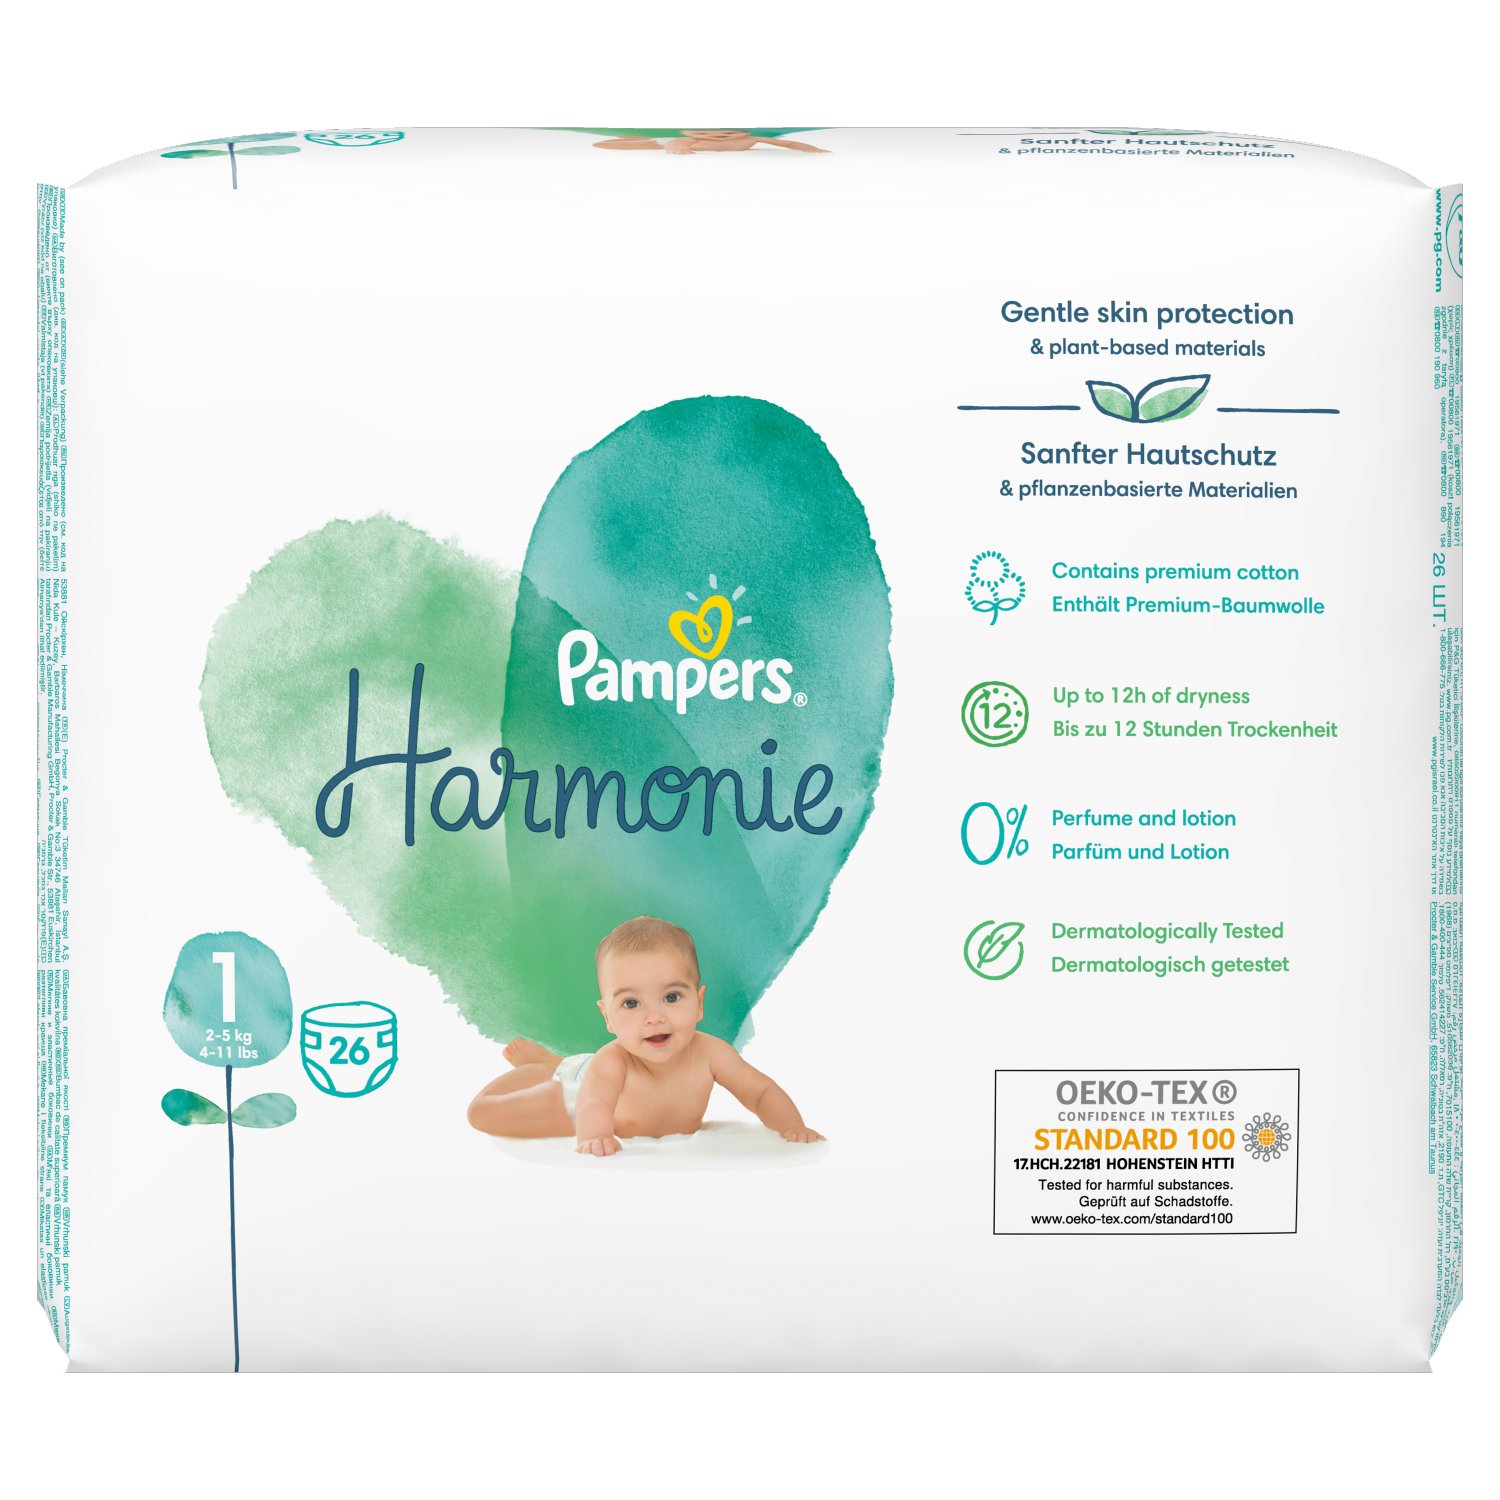 Pampers Harmonie Size 1 Carry Pack (26 Piece)